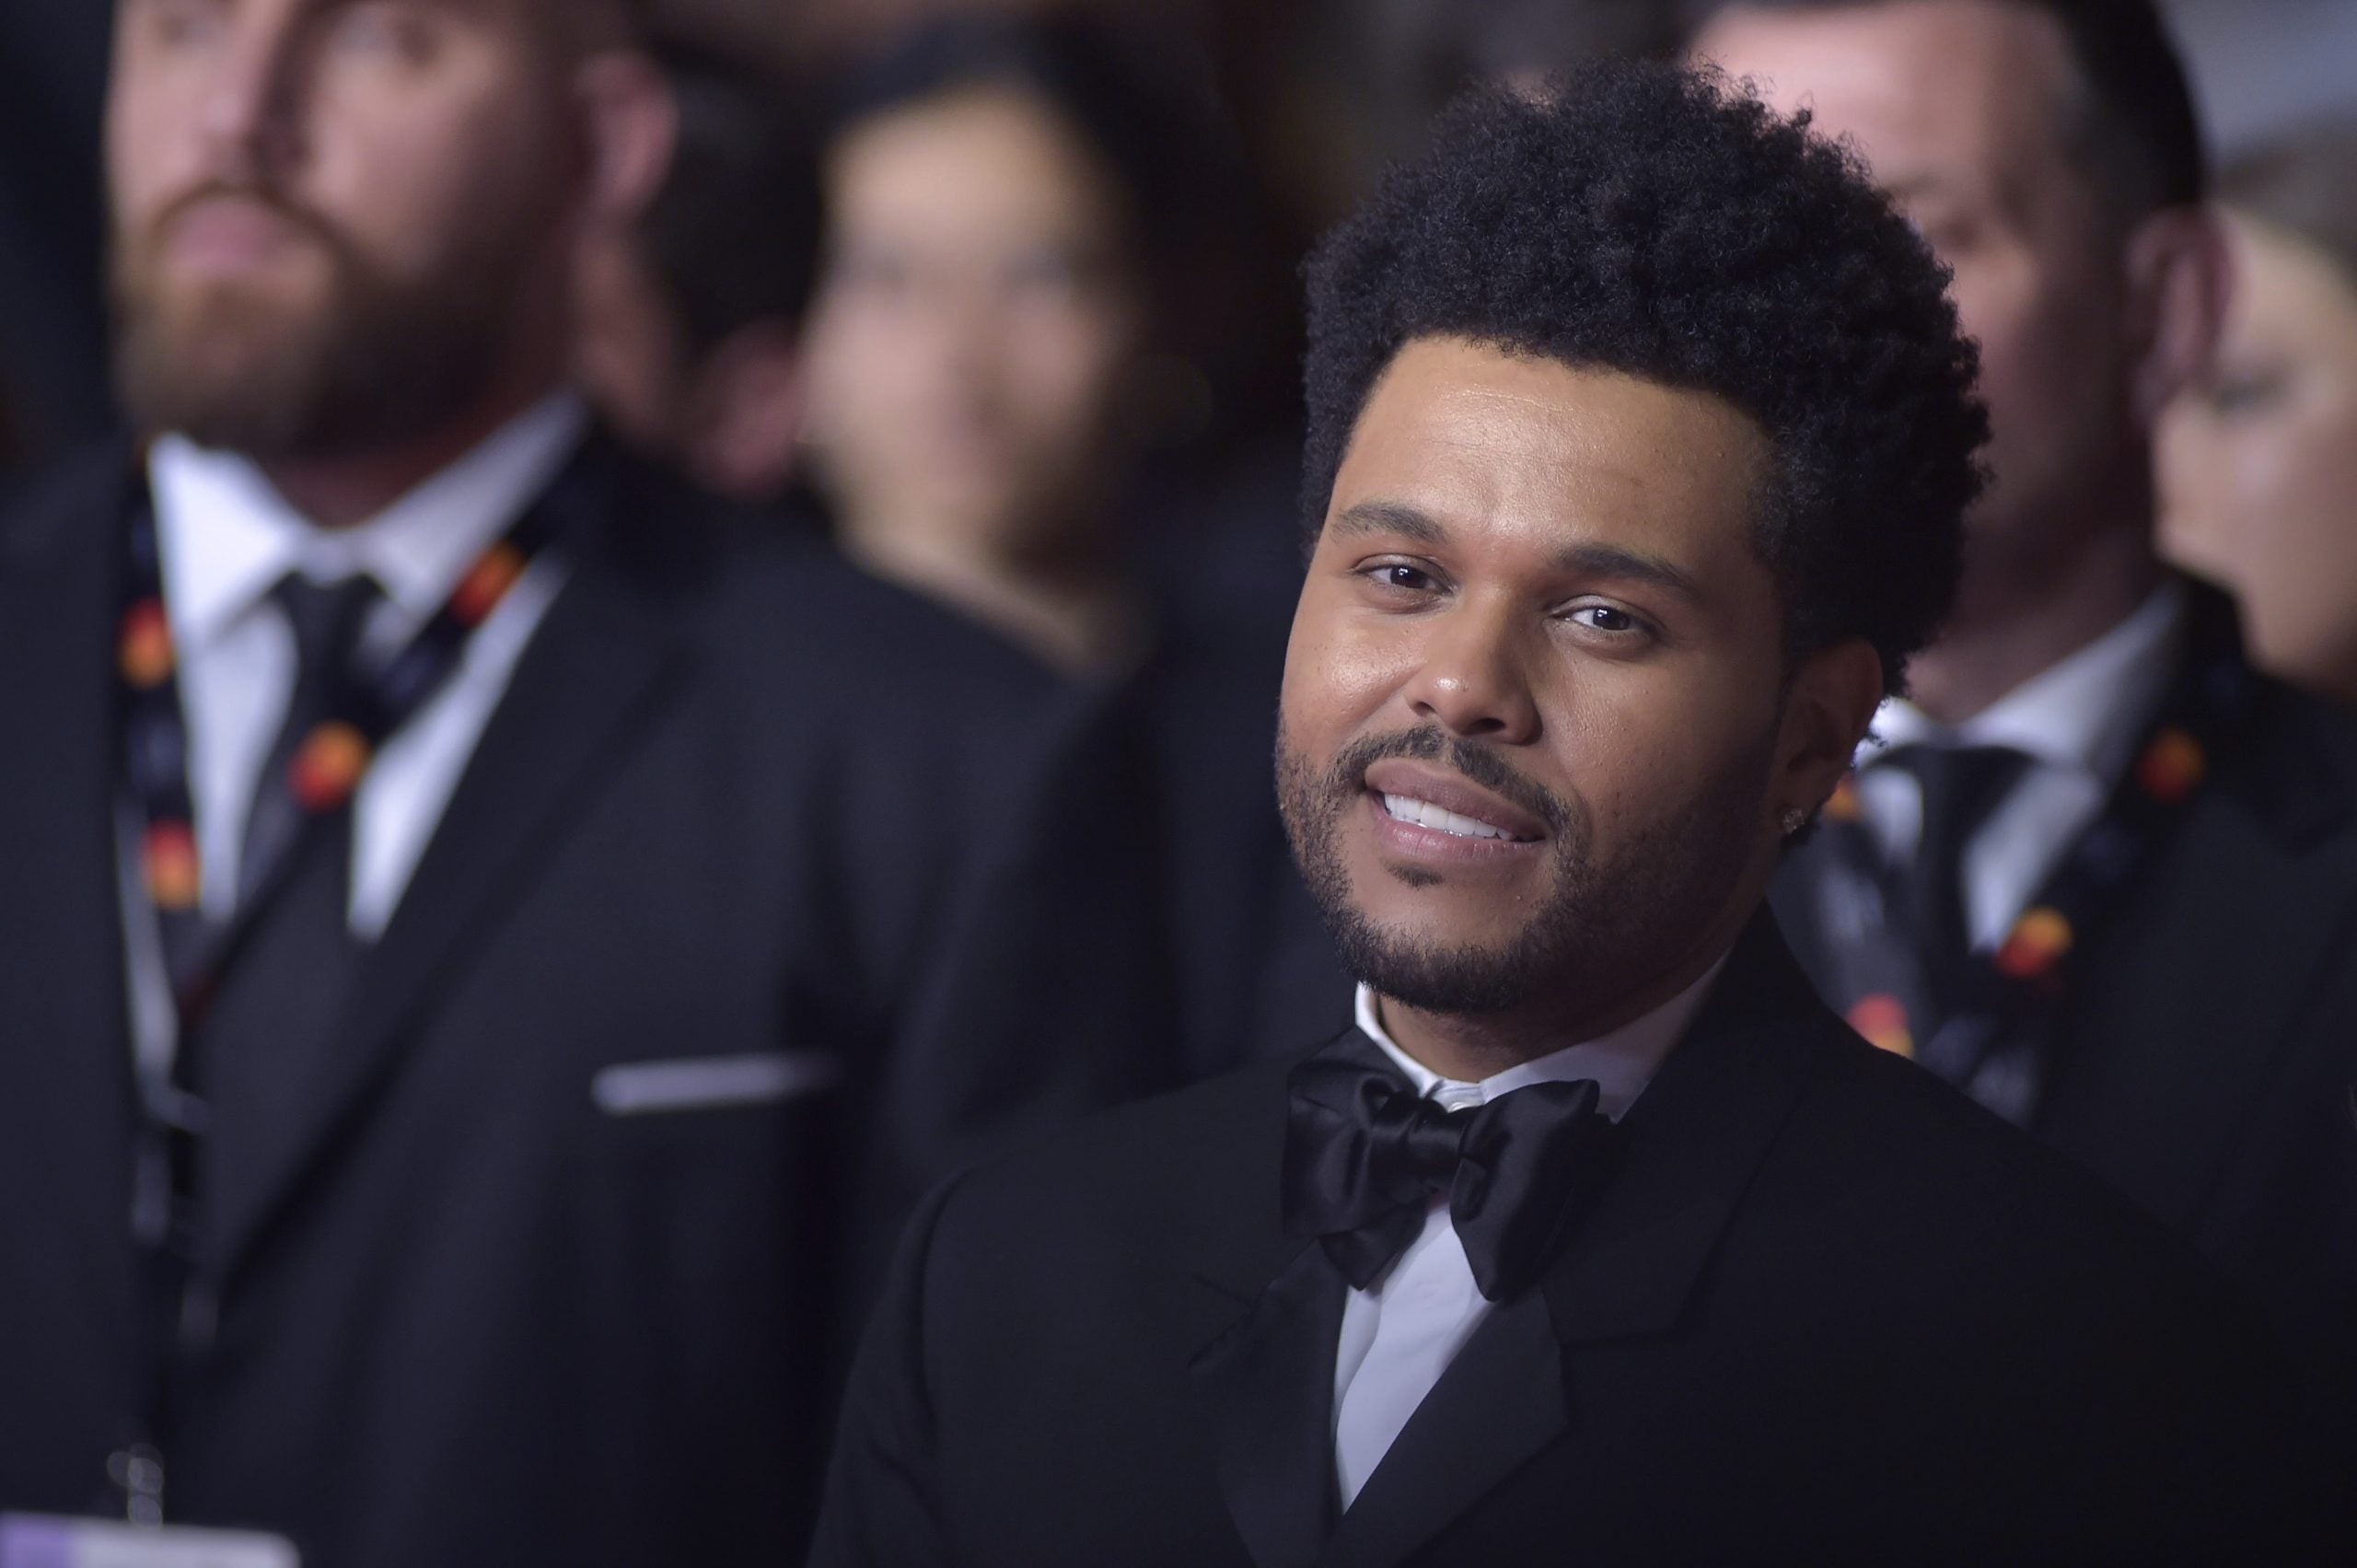 The Weeknd Partnered With This Non-Profit To Give Homeless Children Laptops, Internet And More